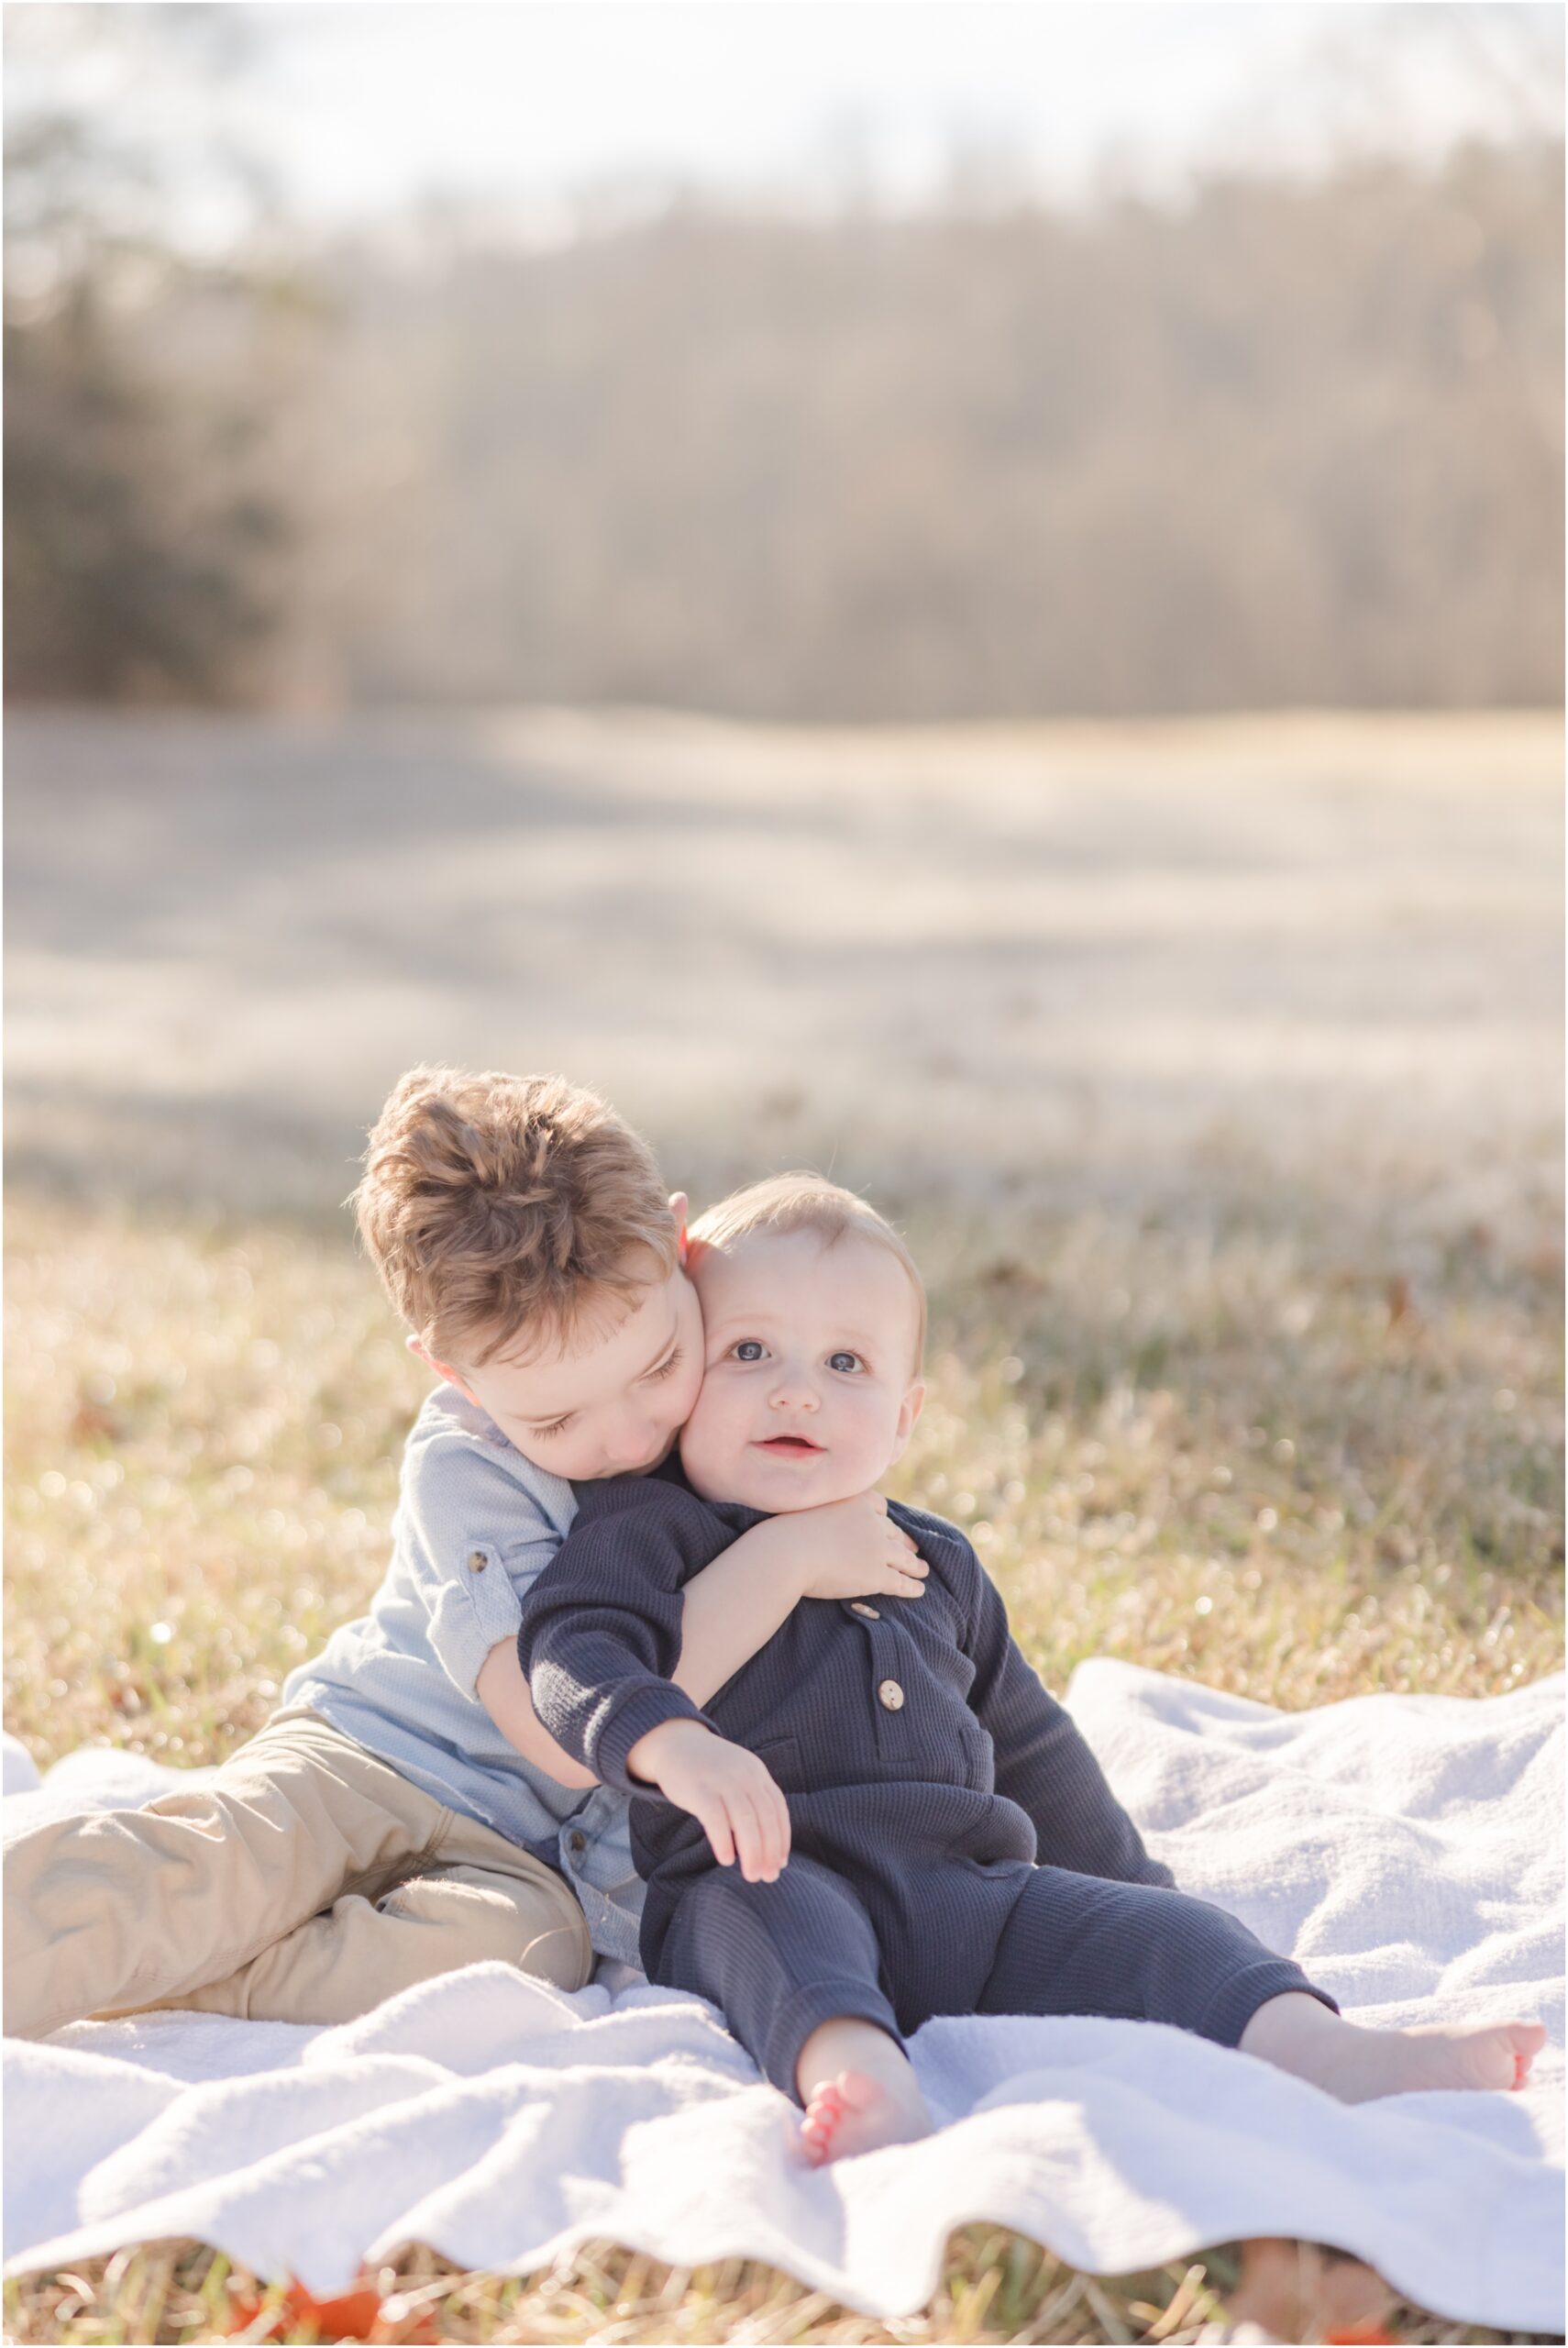 An older brother snuggles his baby brother while posing for Greenville photographer.